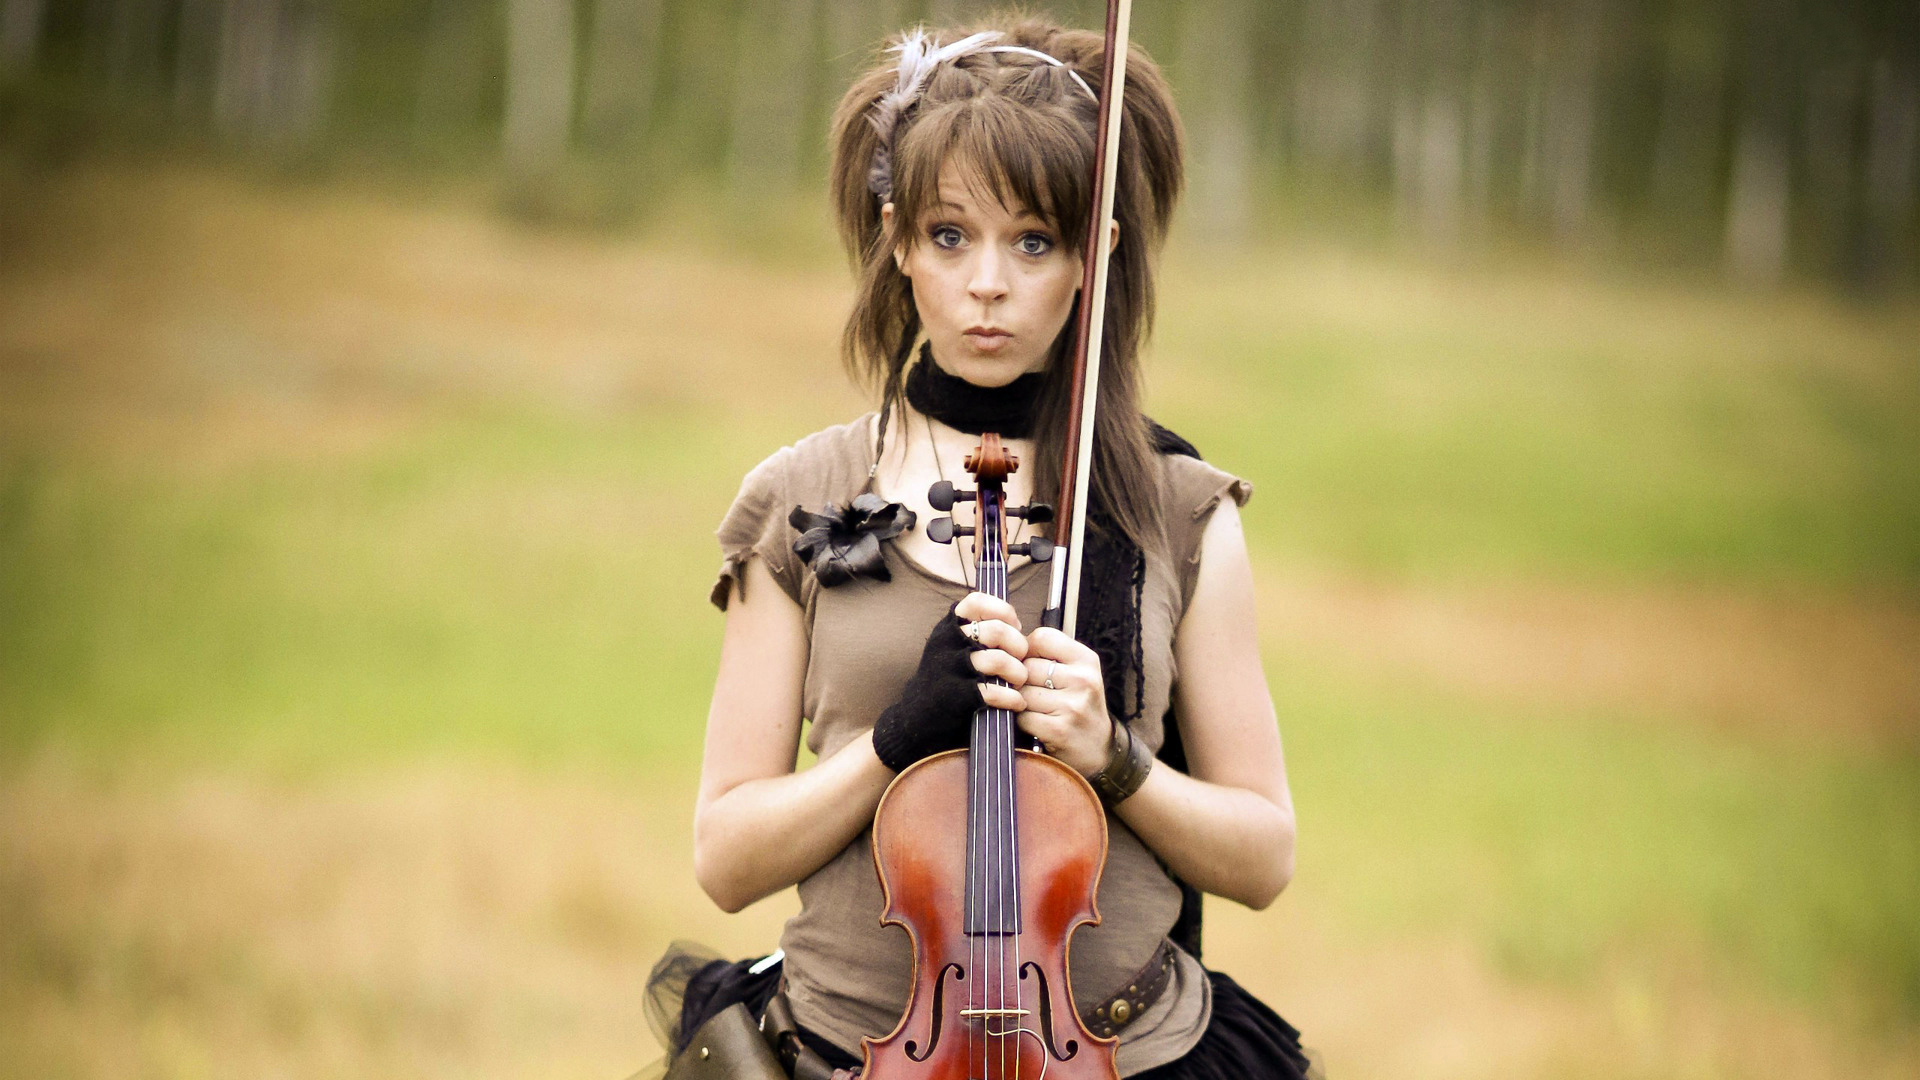 People 1920x1080 Lindsey Stirling violin women musician celebrity blurry background women outdoors looking at viewer